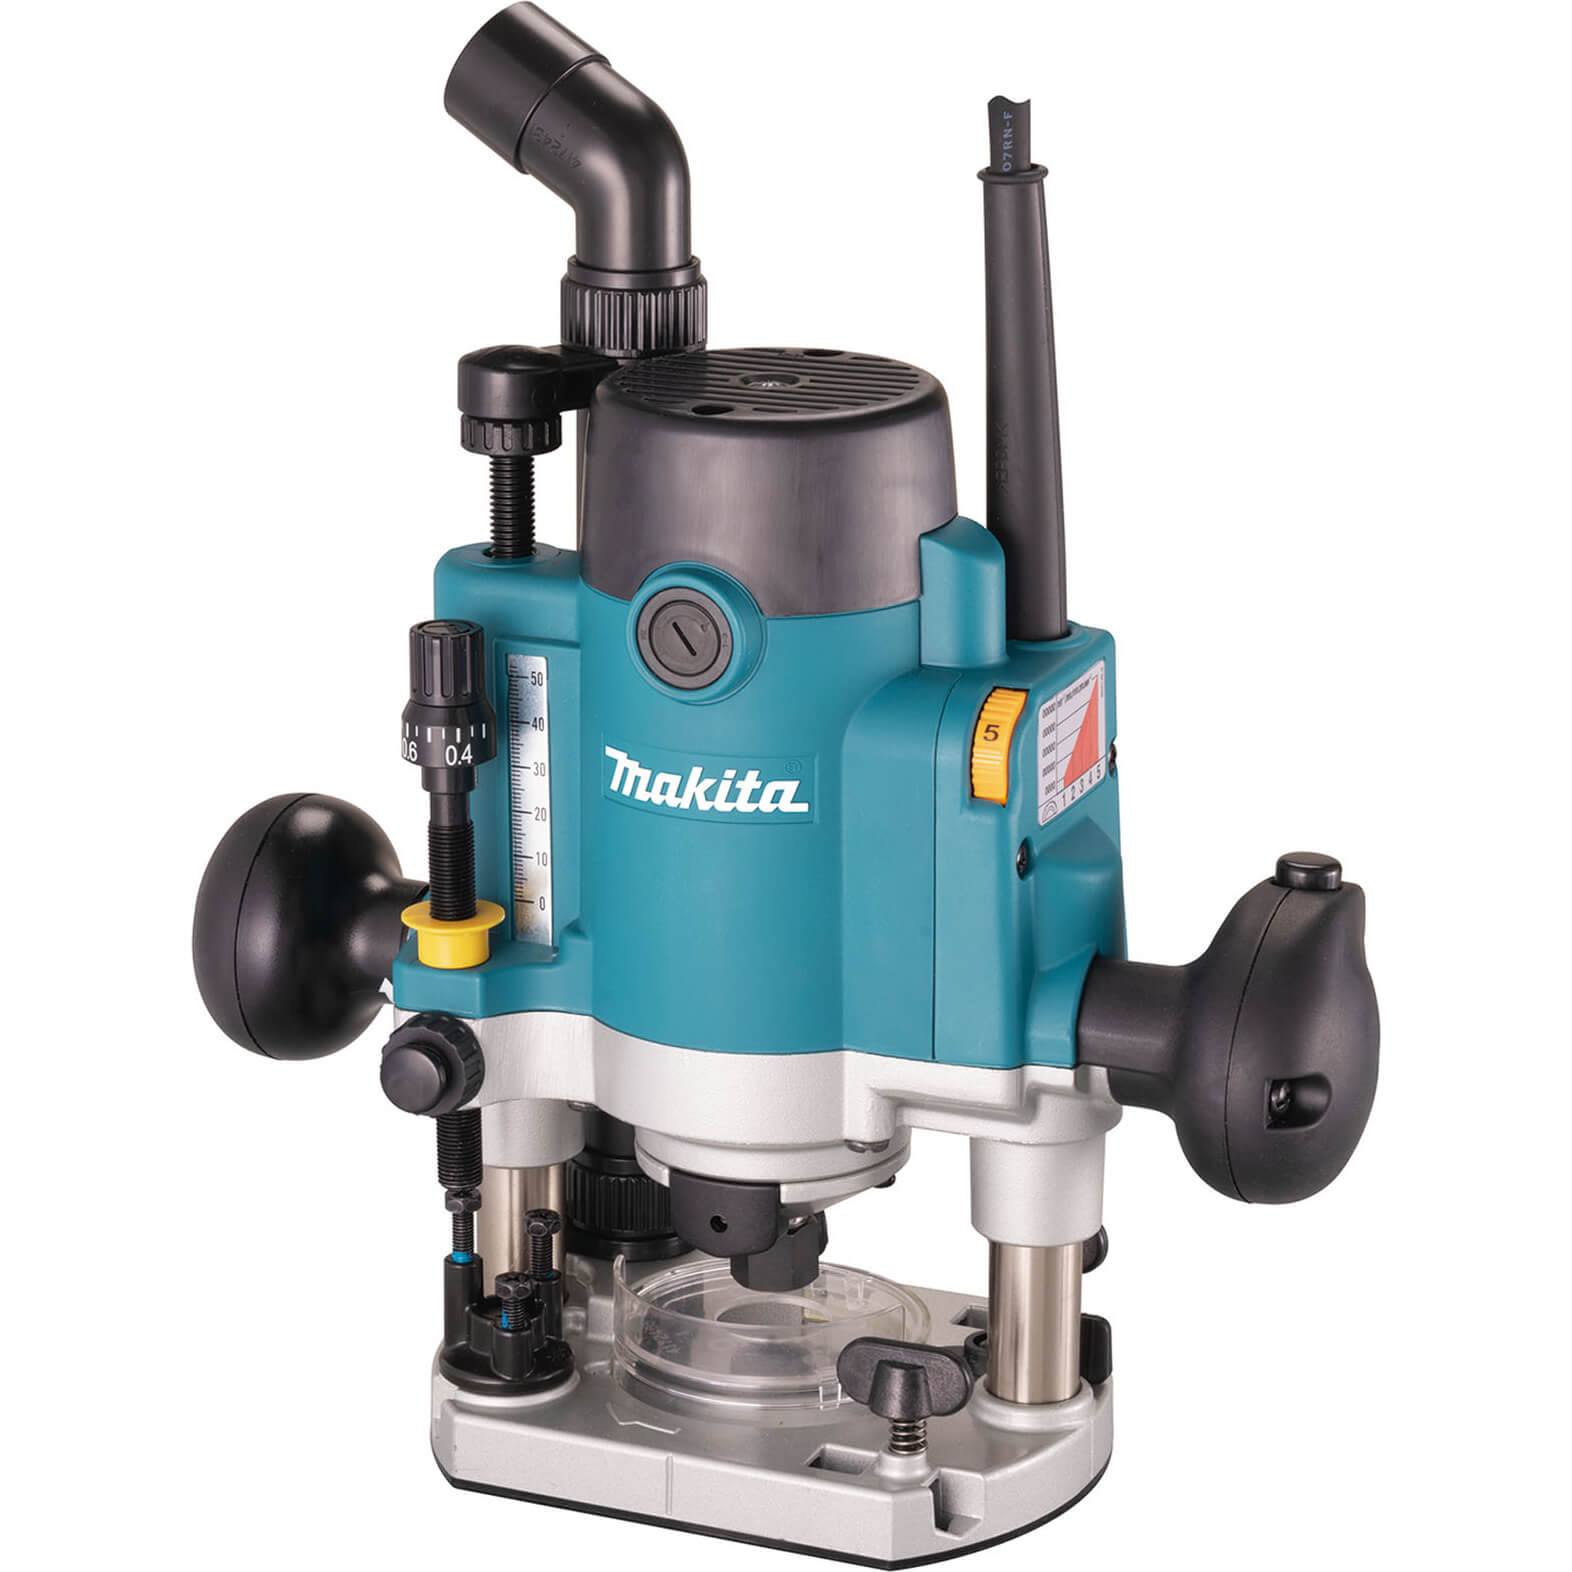 Image of Makita RP1111C 1/4" Plunge Router 110v